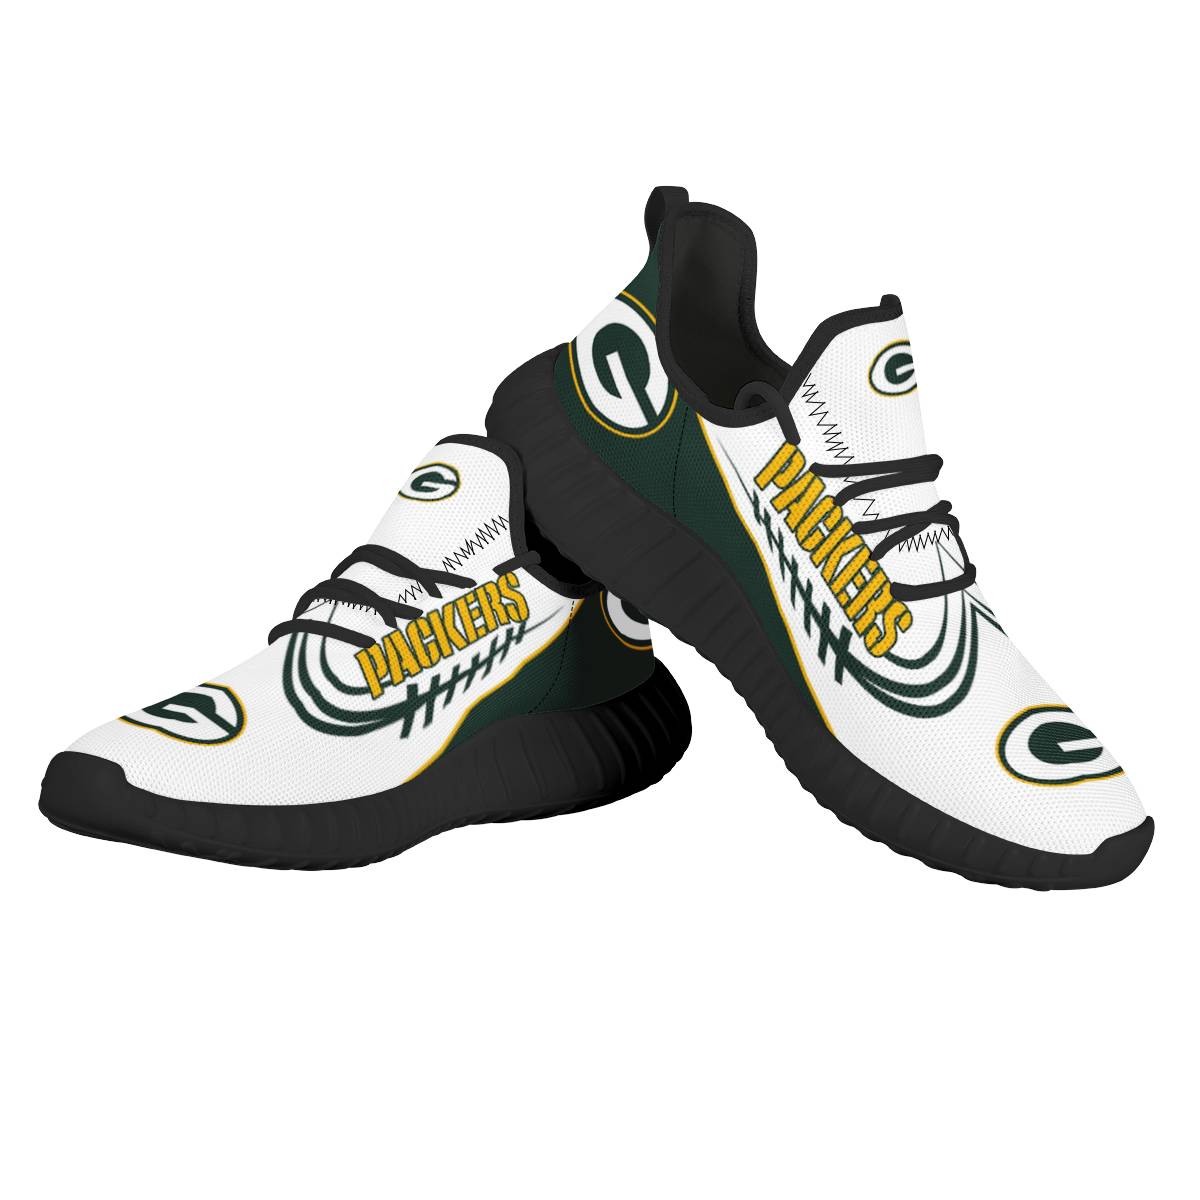 Women's NFL Green Bay Packers Mesh Knit Sneakers/Shoes 010